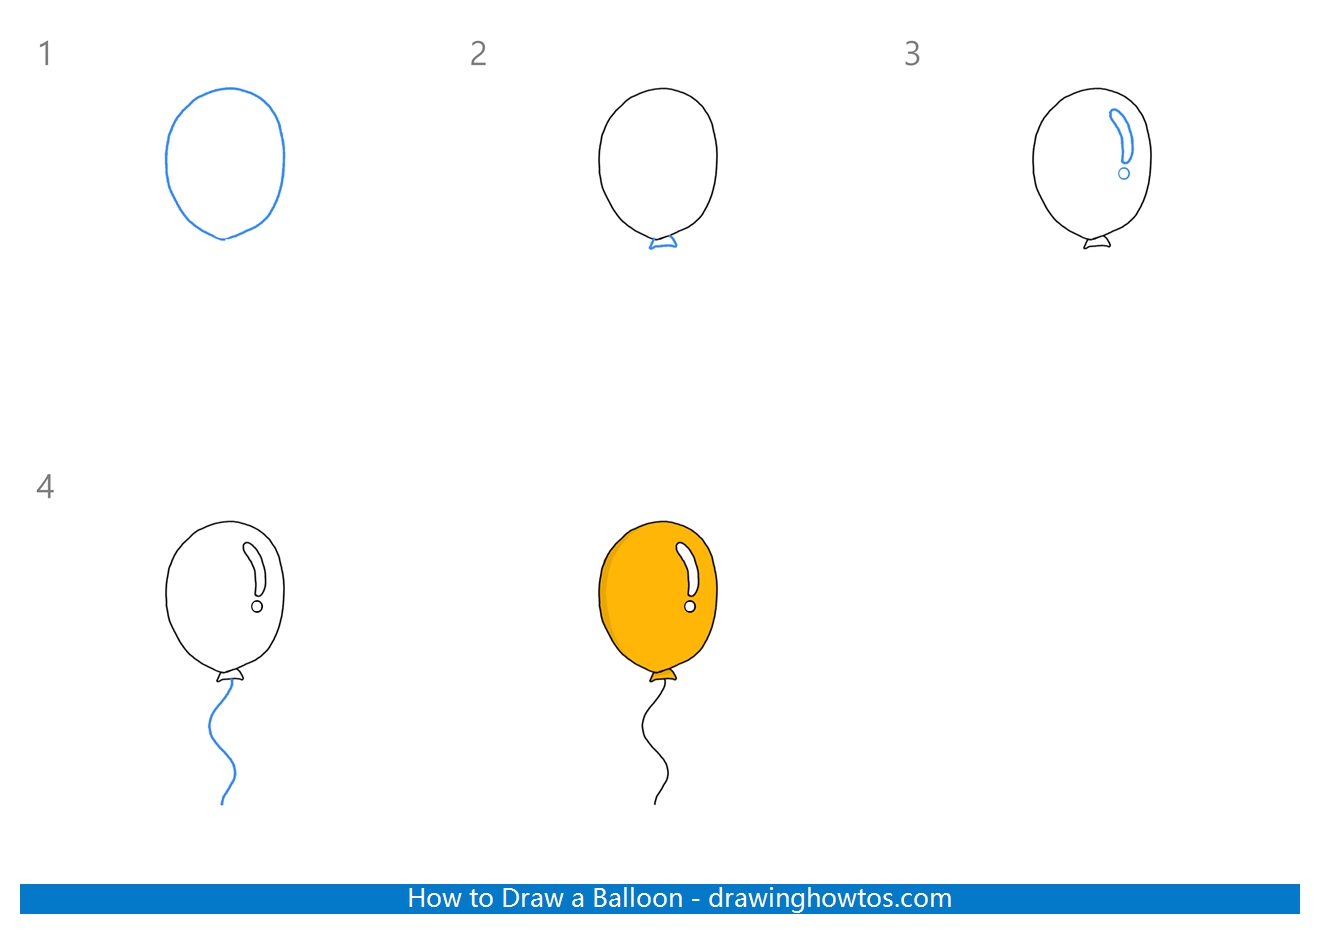 How to Draw a Balloon Step by Step